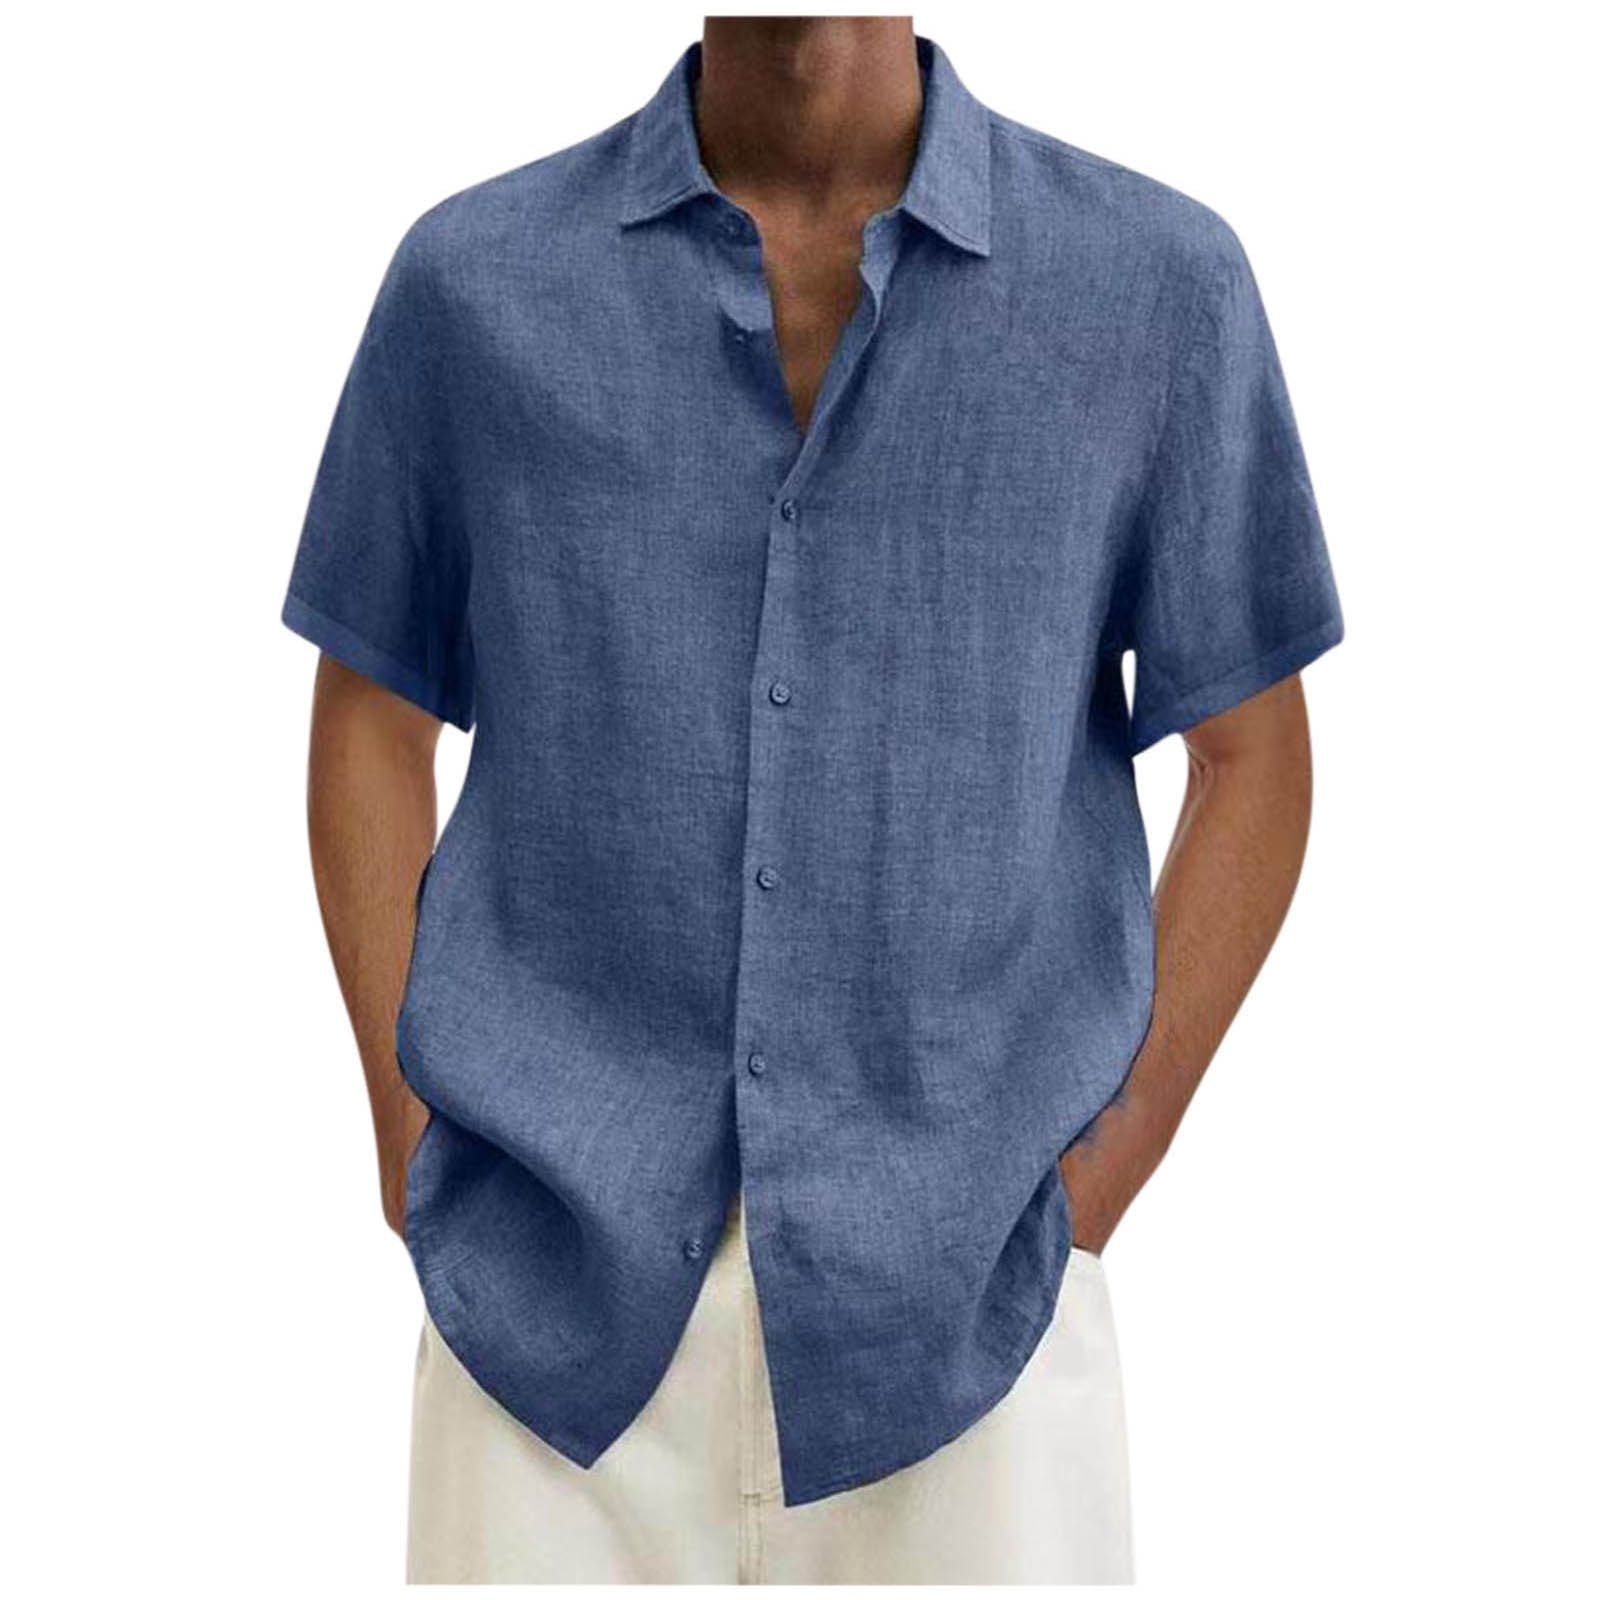 VSSSJ Button Down Shirt for Men Relaxed Fit Hawaiian Casual Print Short  Sleeve Collared Tee Shirt Quick Dry Lightweight Lounging Cardigan Tops Red  XL